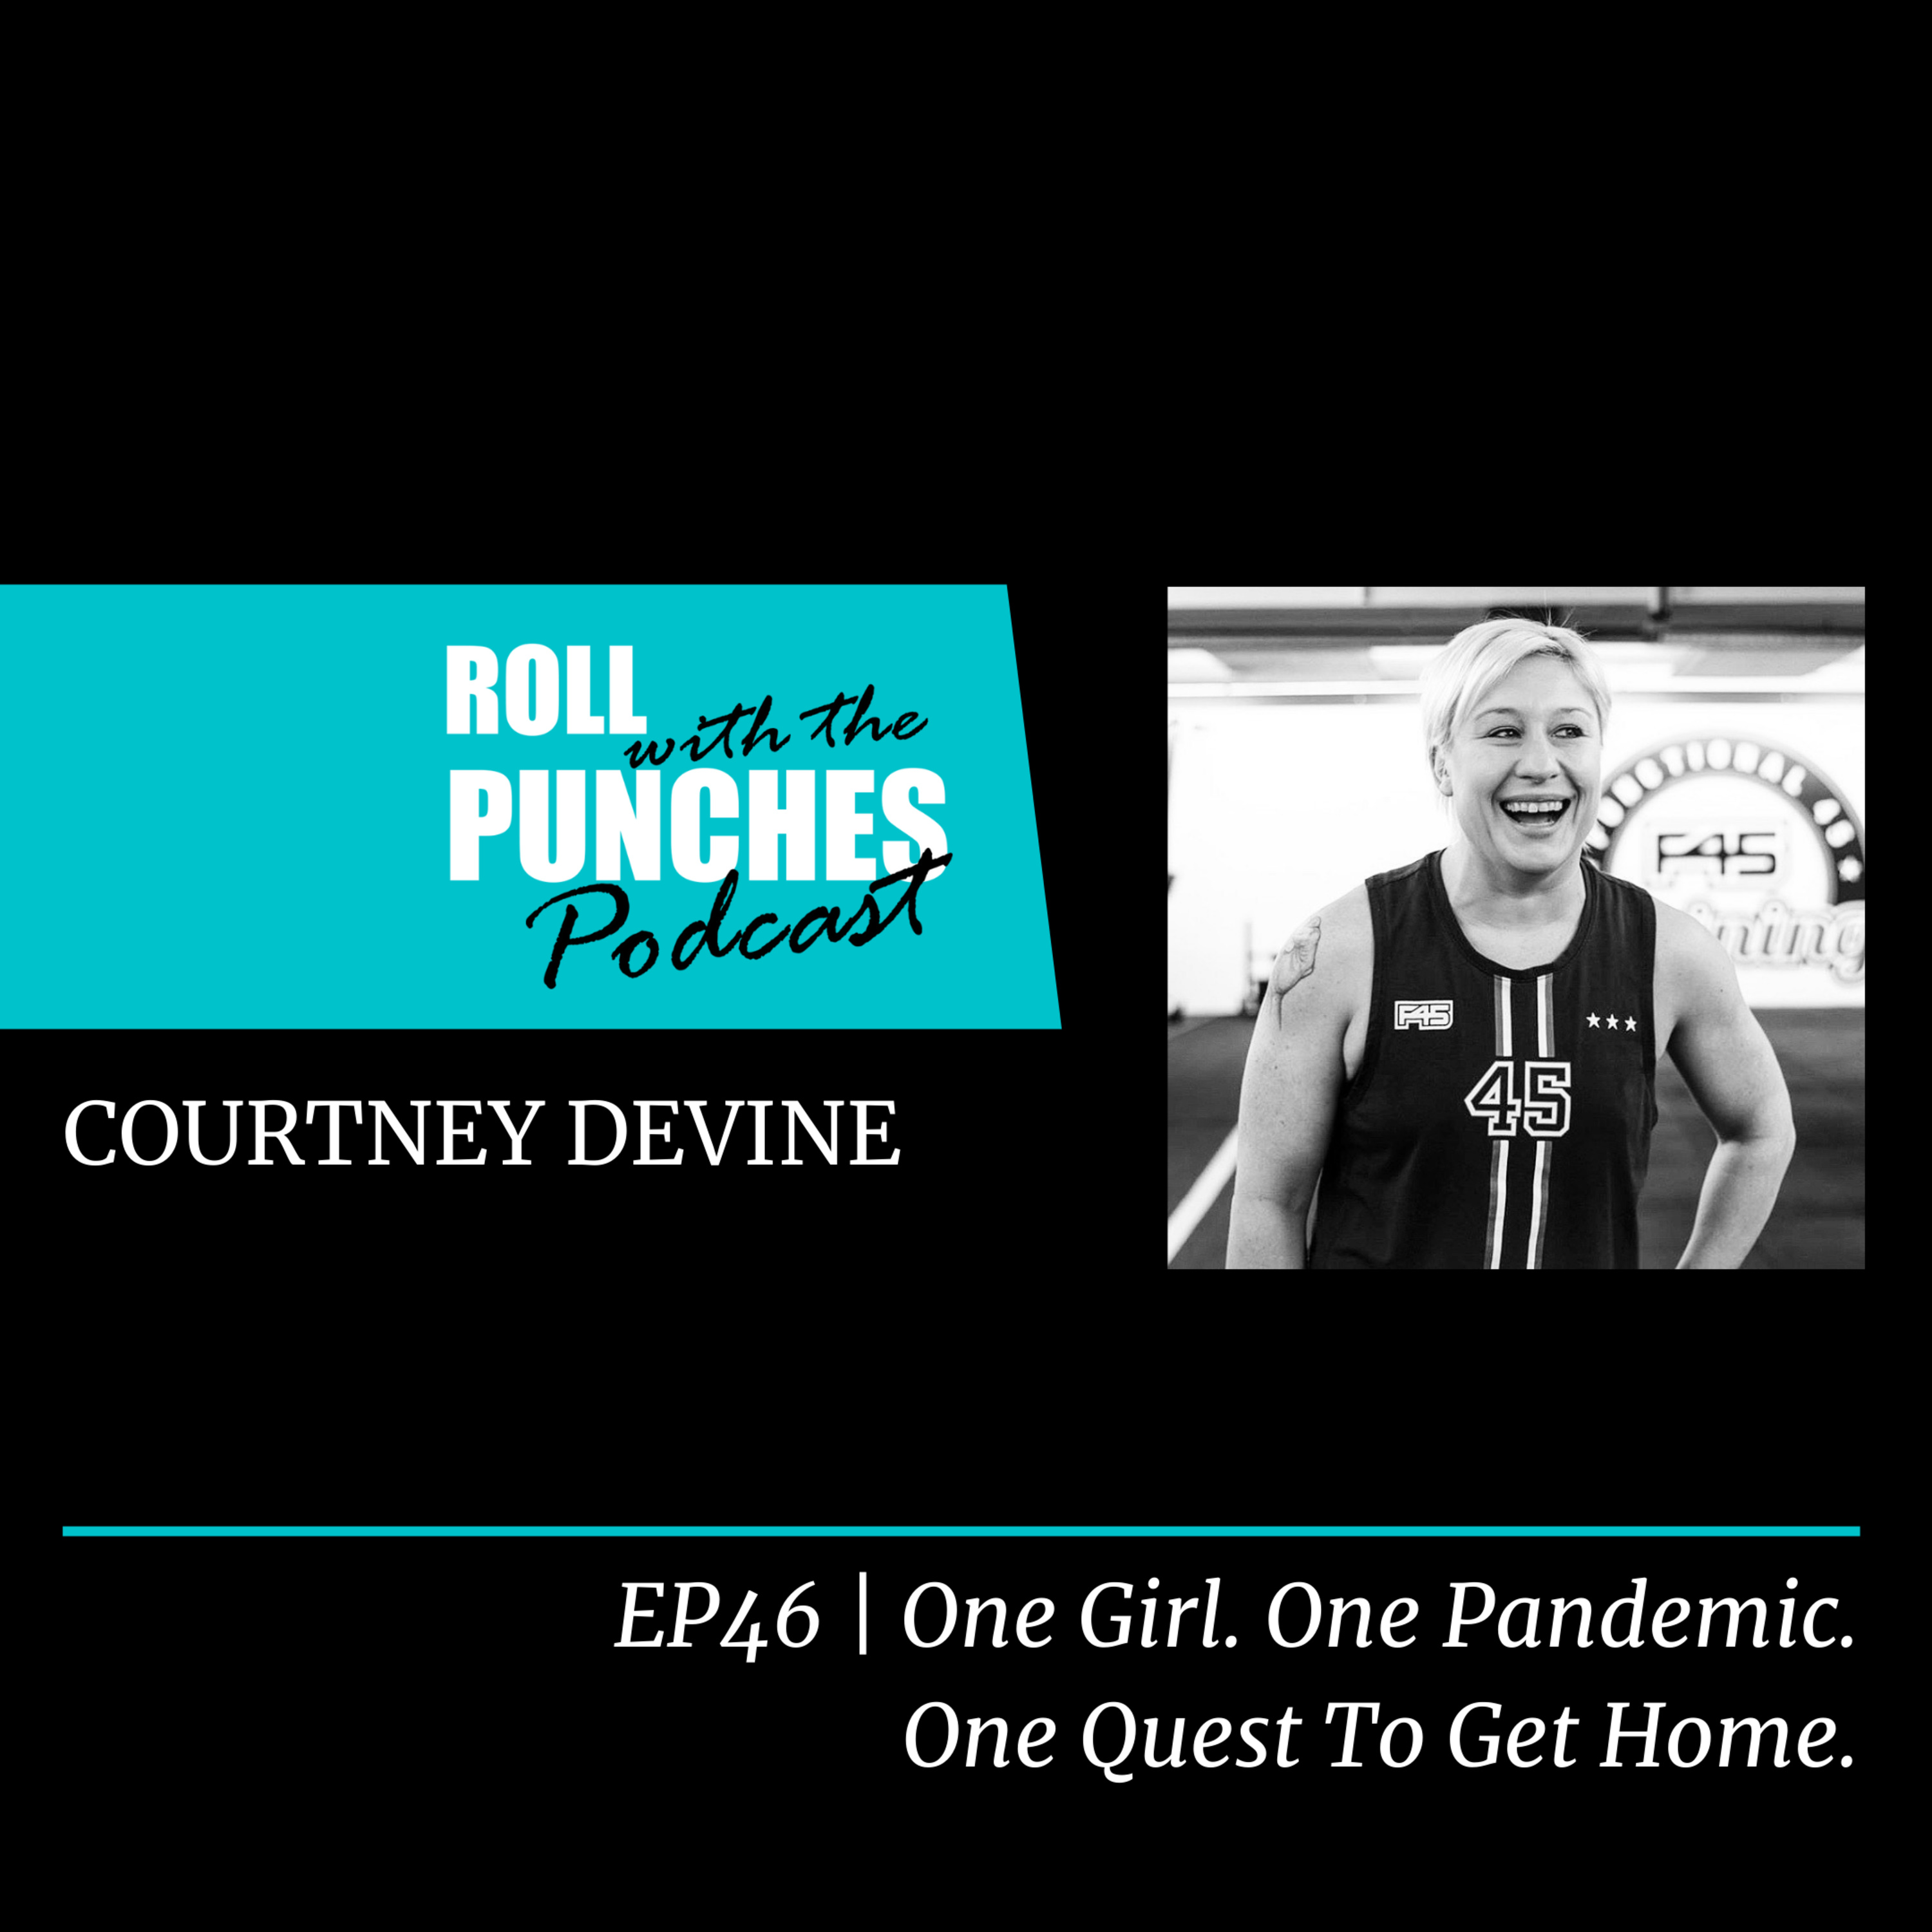 EP46 One Girl. One Pandemic. One Quest To Get Home. | Courtney Devine